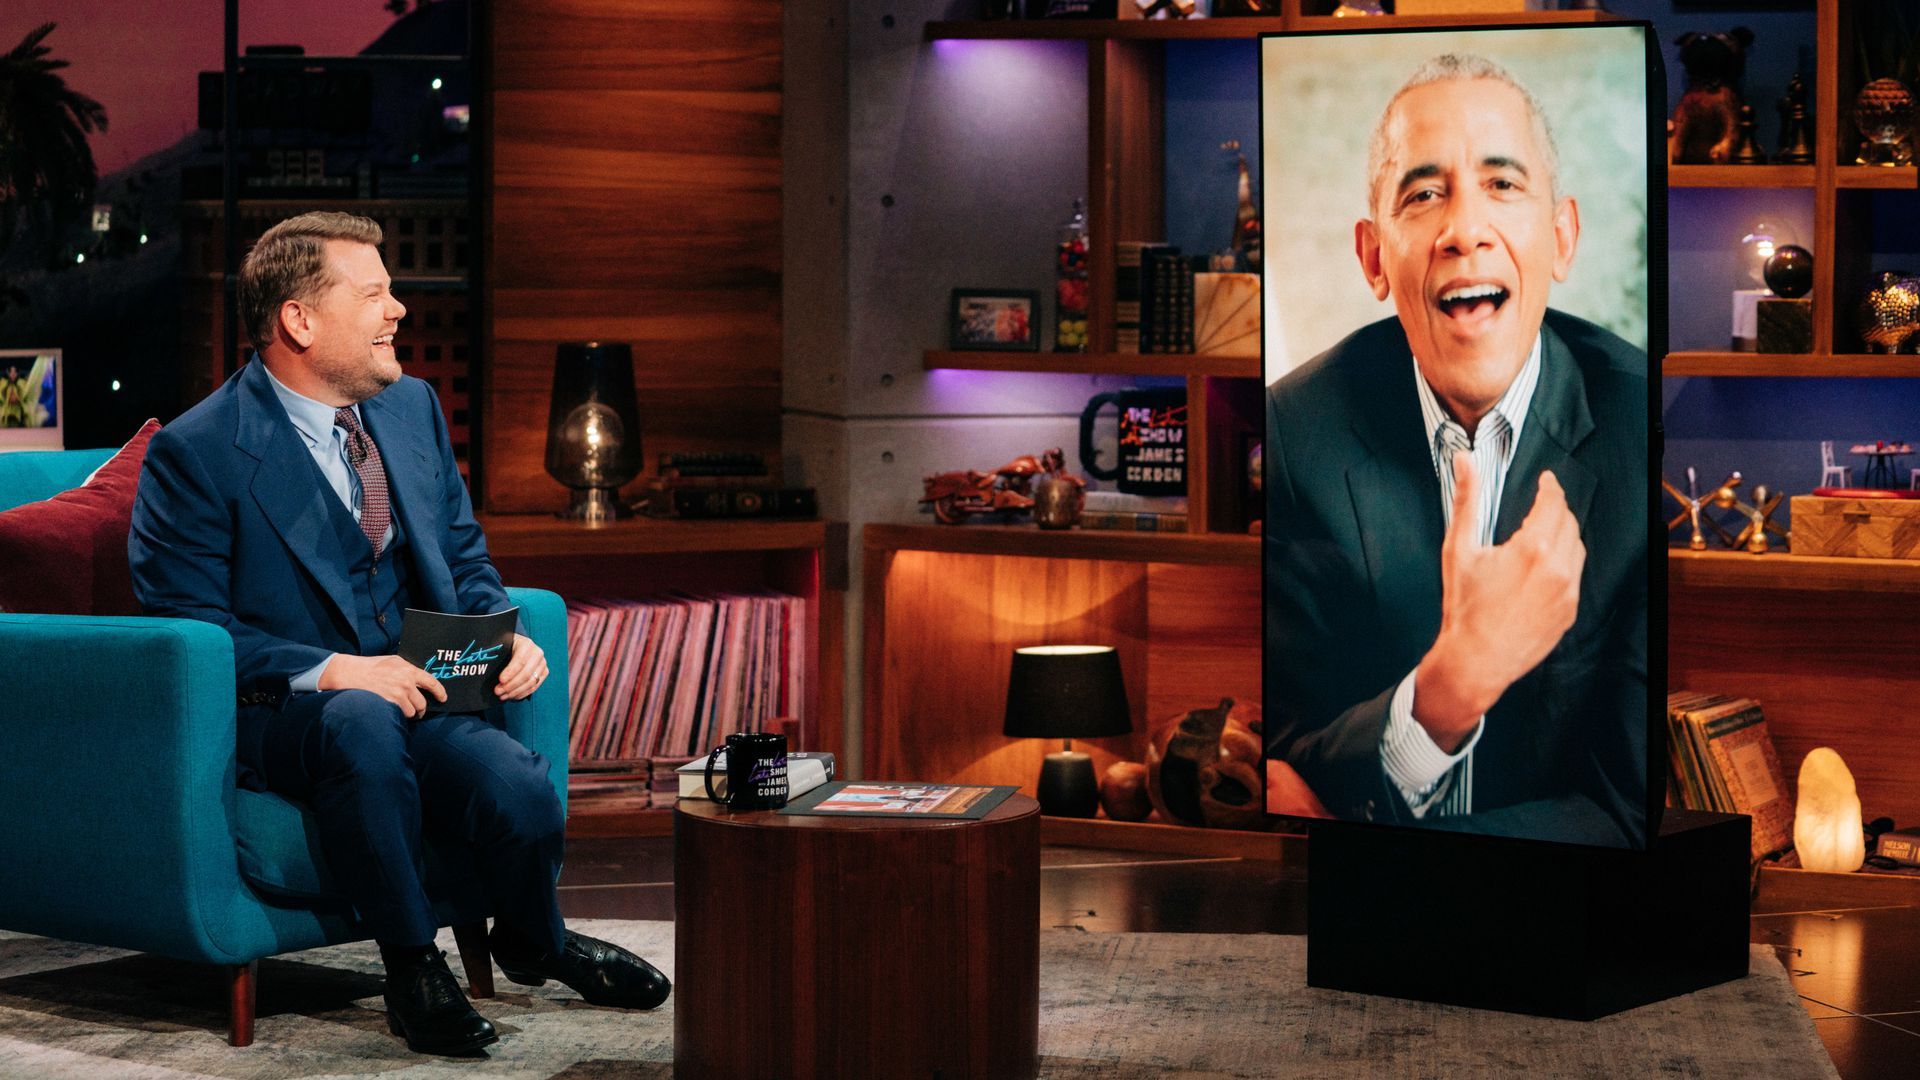 President Obama on "The Late Late Show with James Corden" 